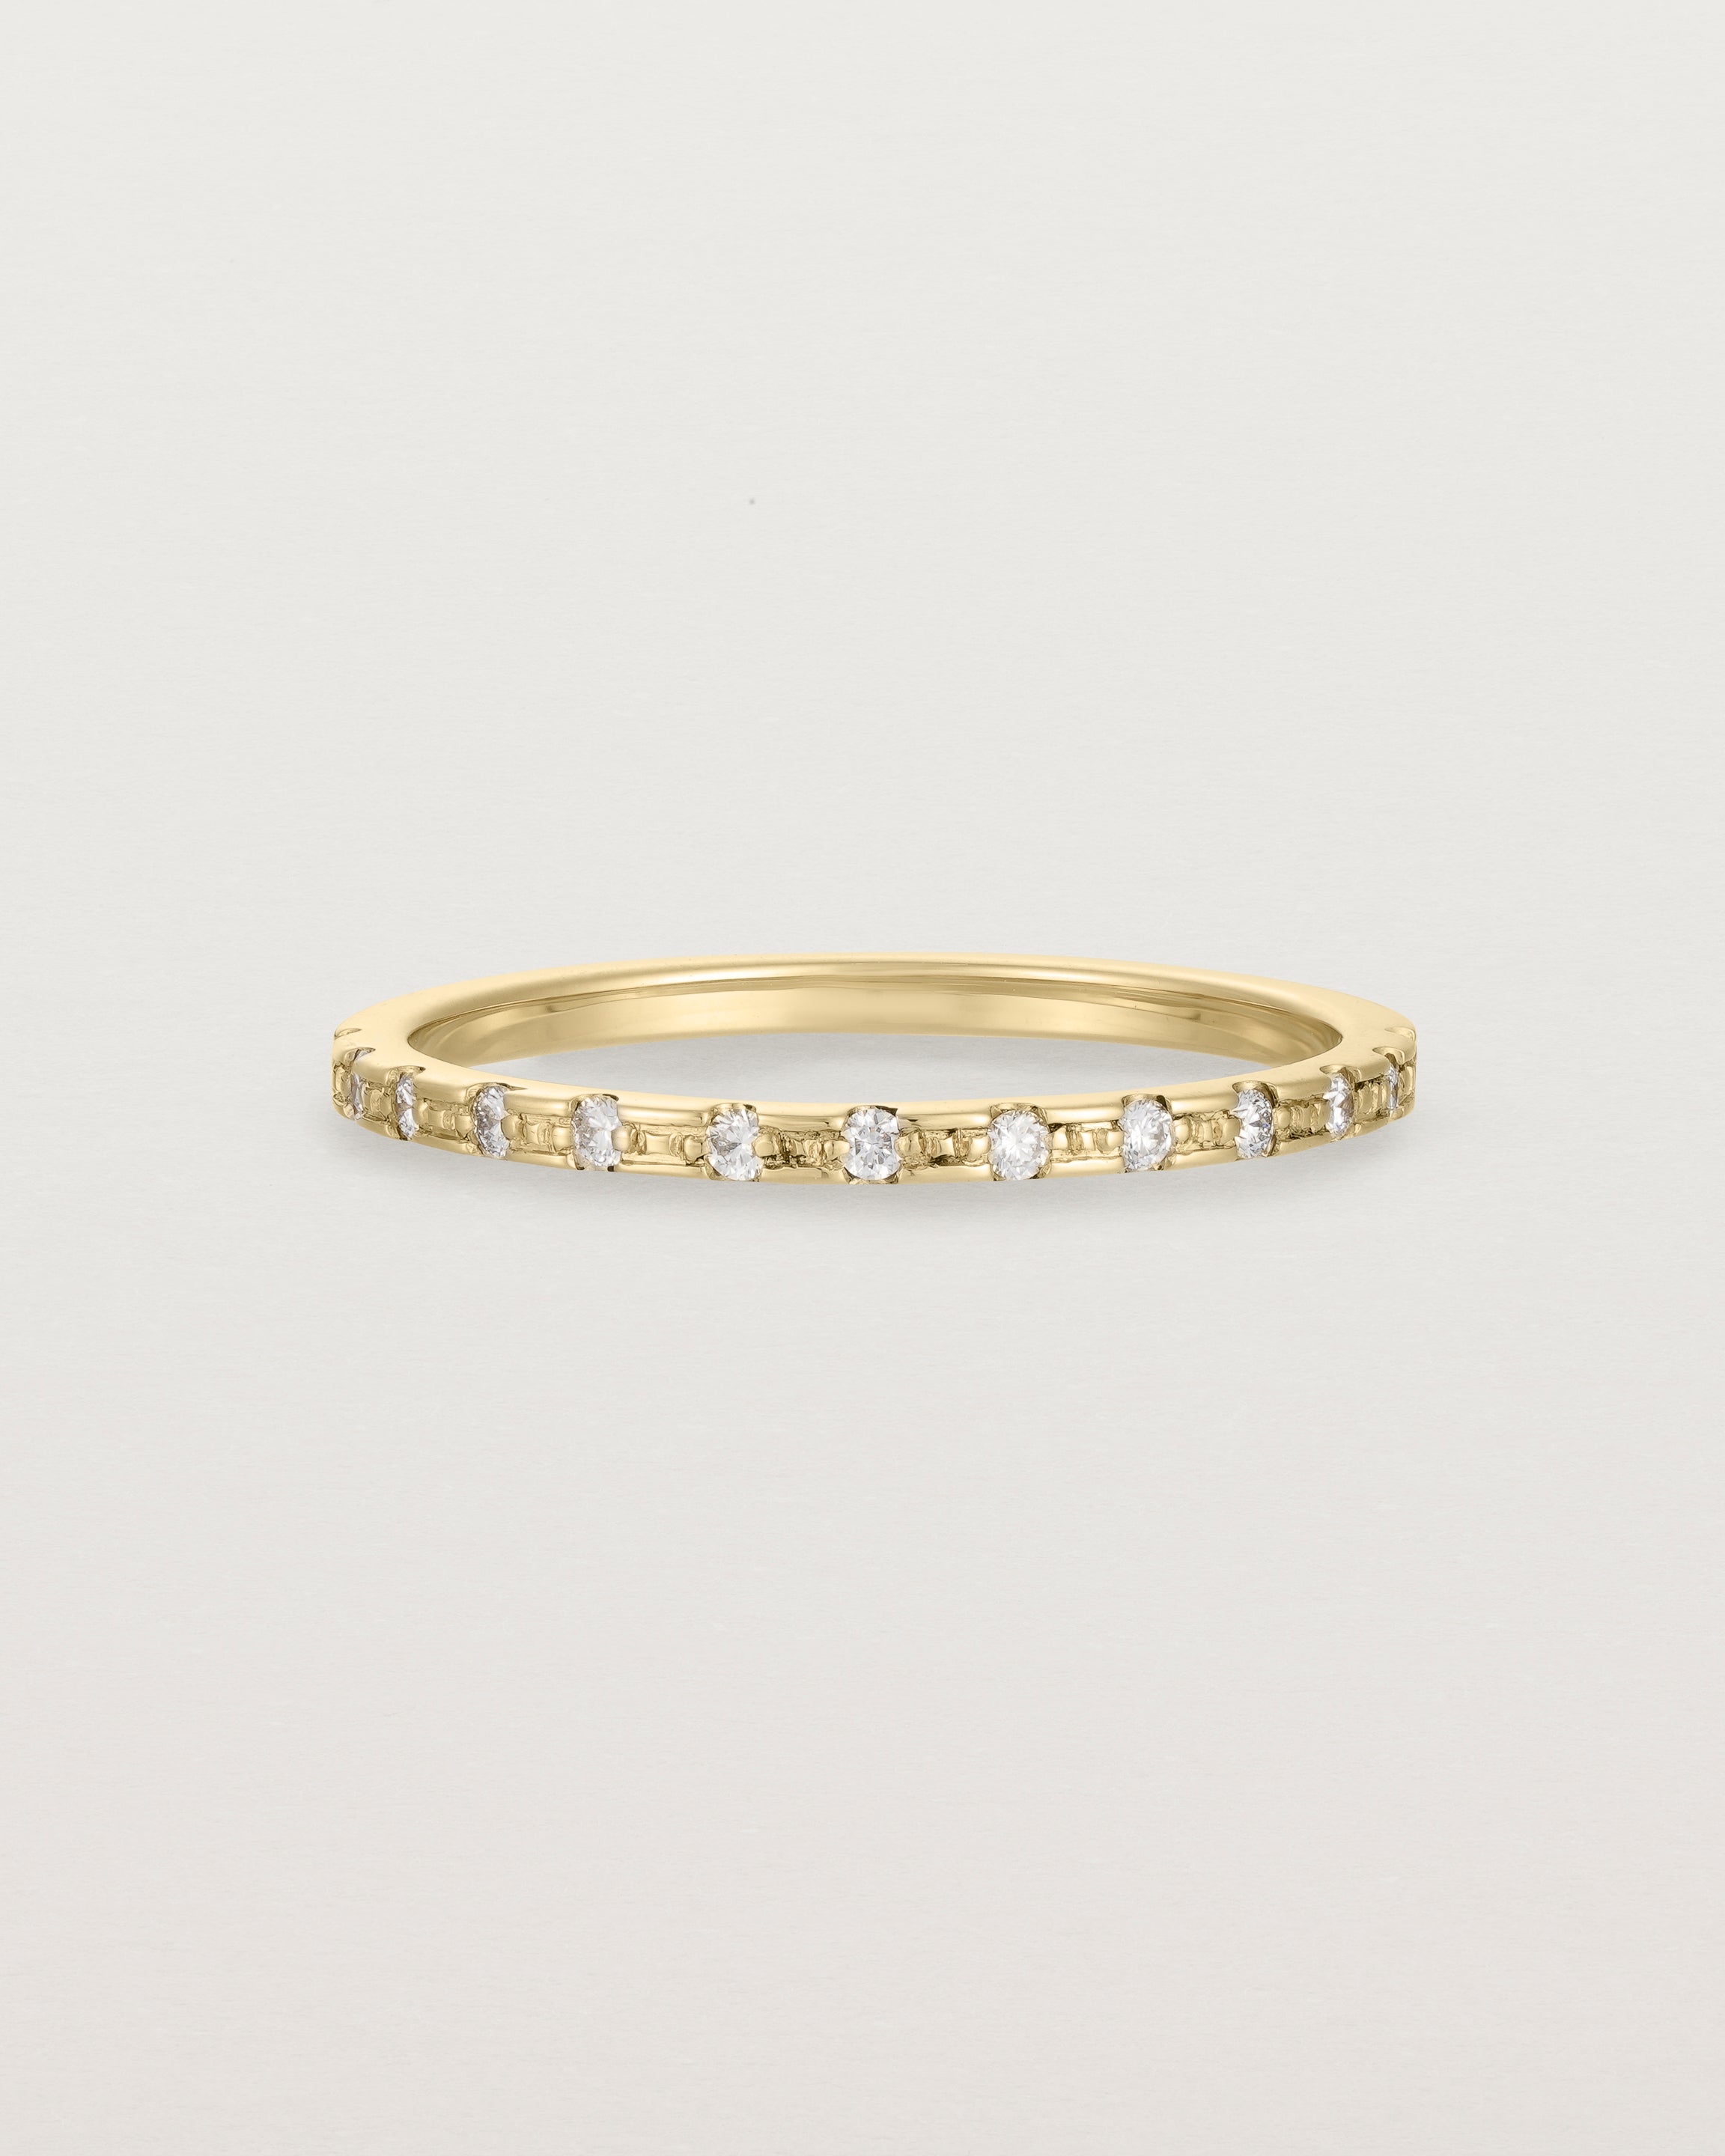 Front View of Cascade Square Profile Wedding Ring | Diamonds | Yellow Gold